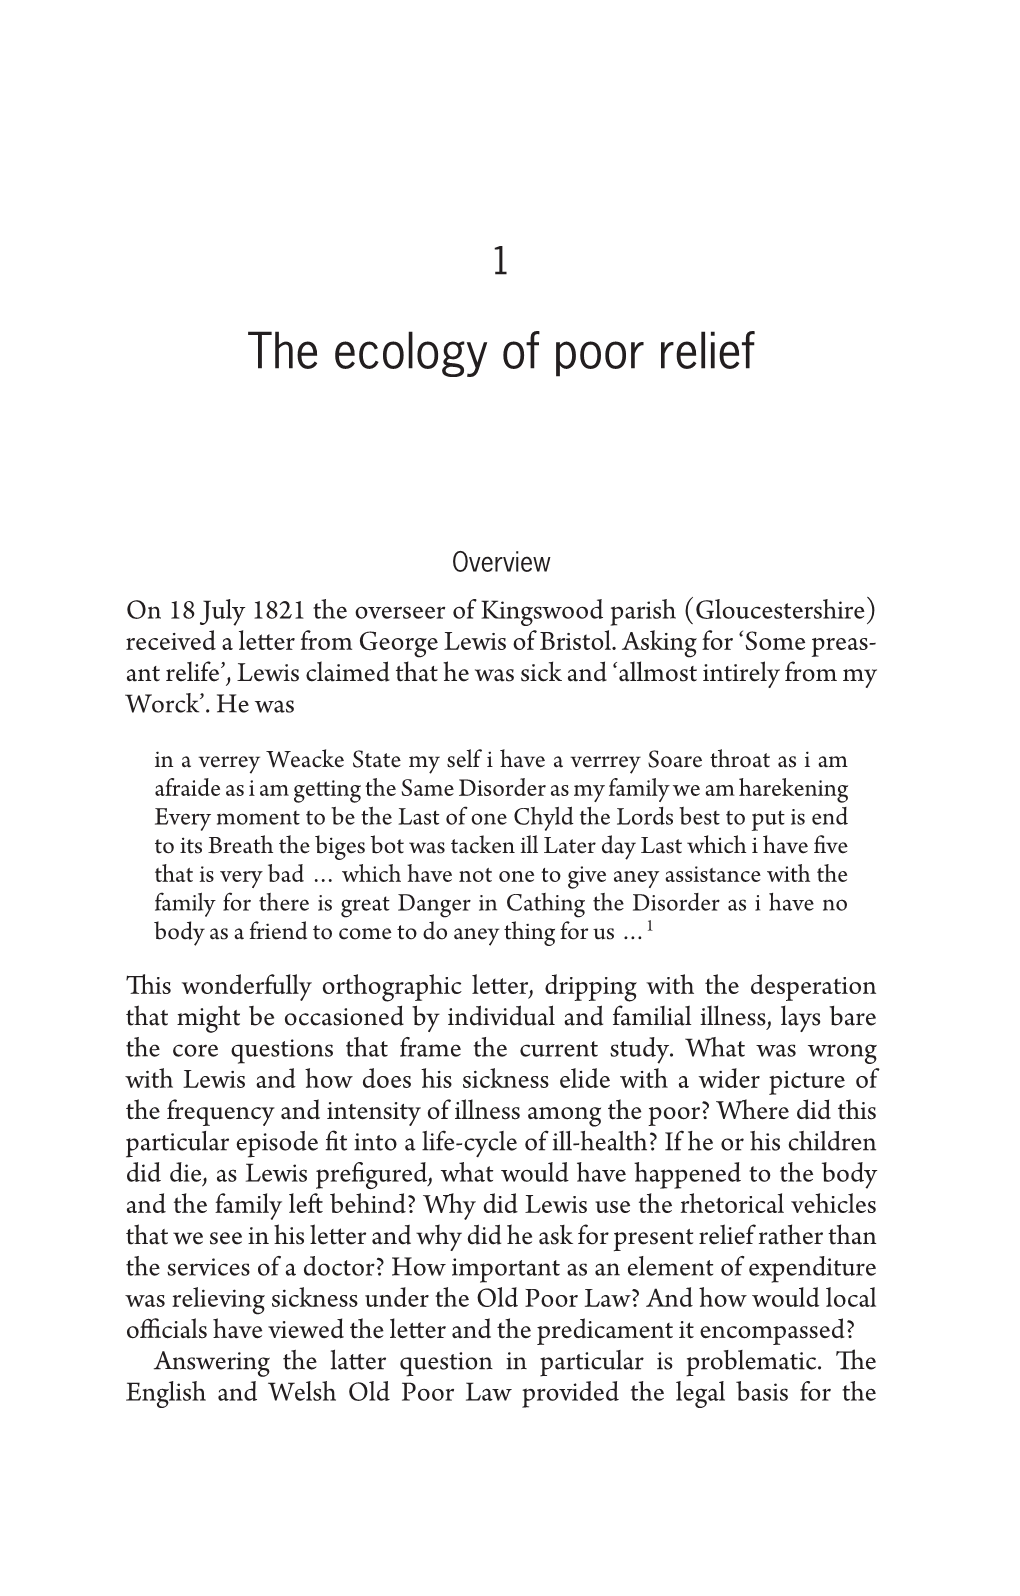 The Ecology of Poor Relief